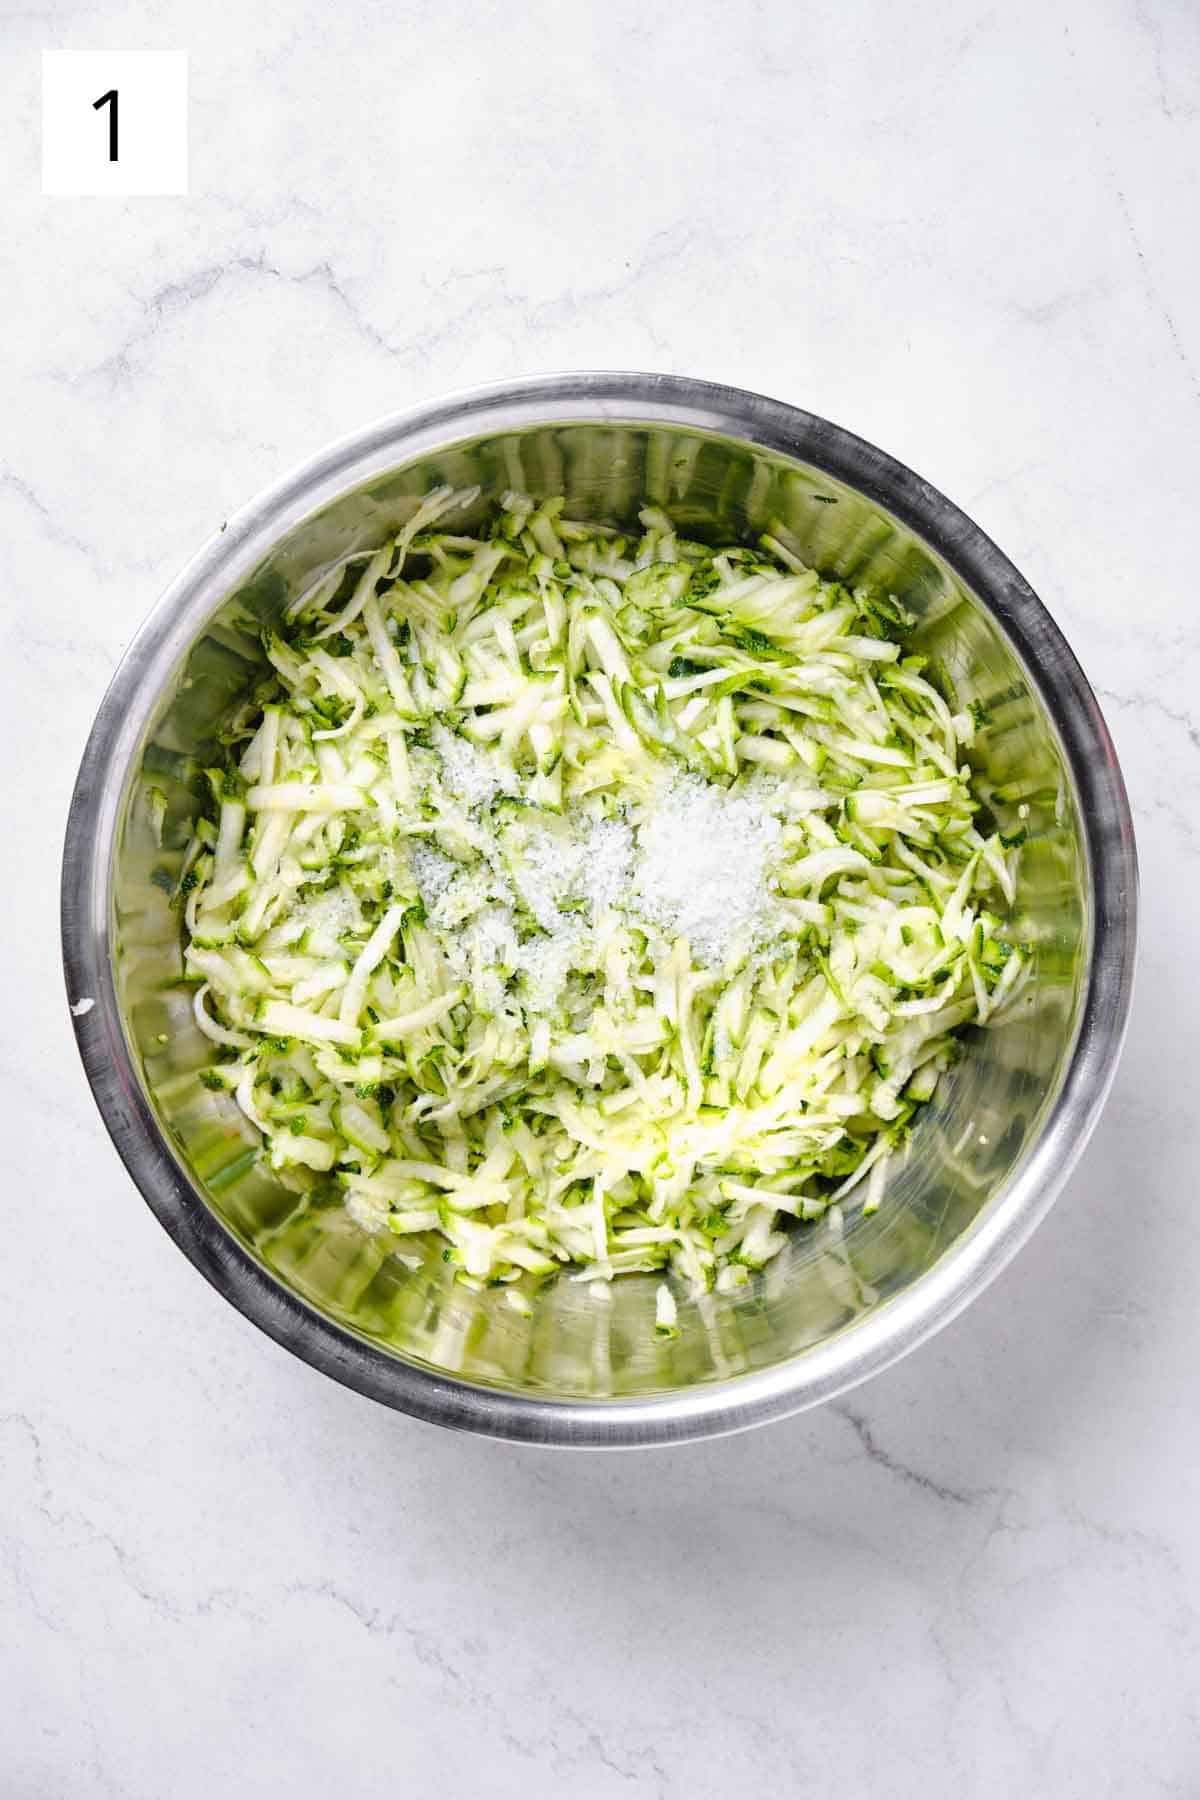 A bowl of grated zucchini with salt sprinkled on top.